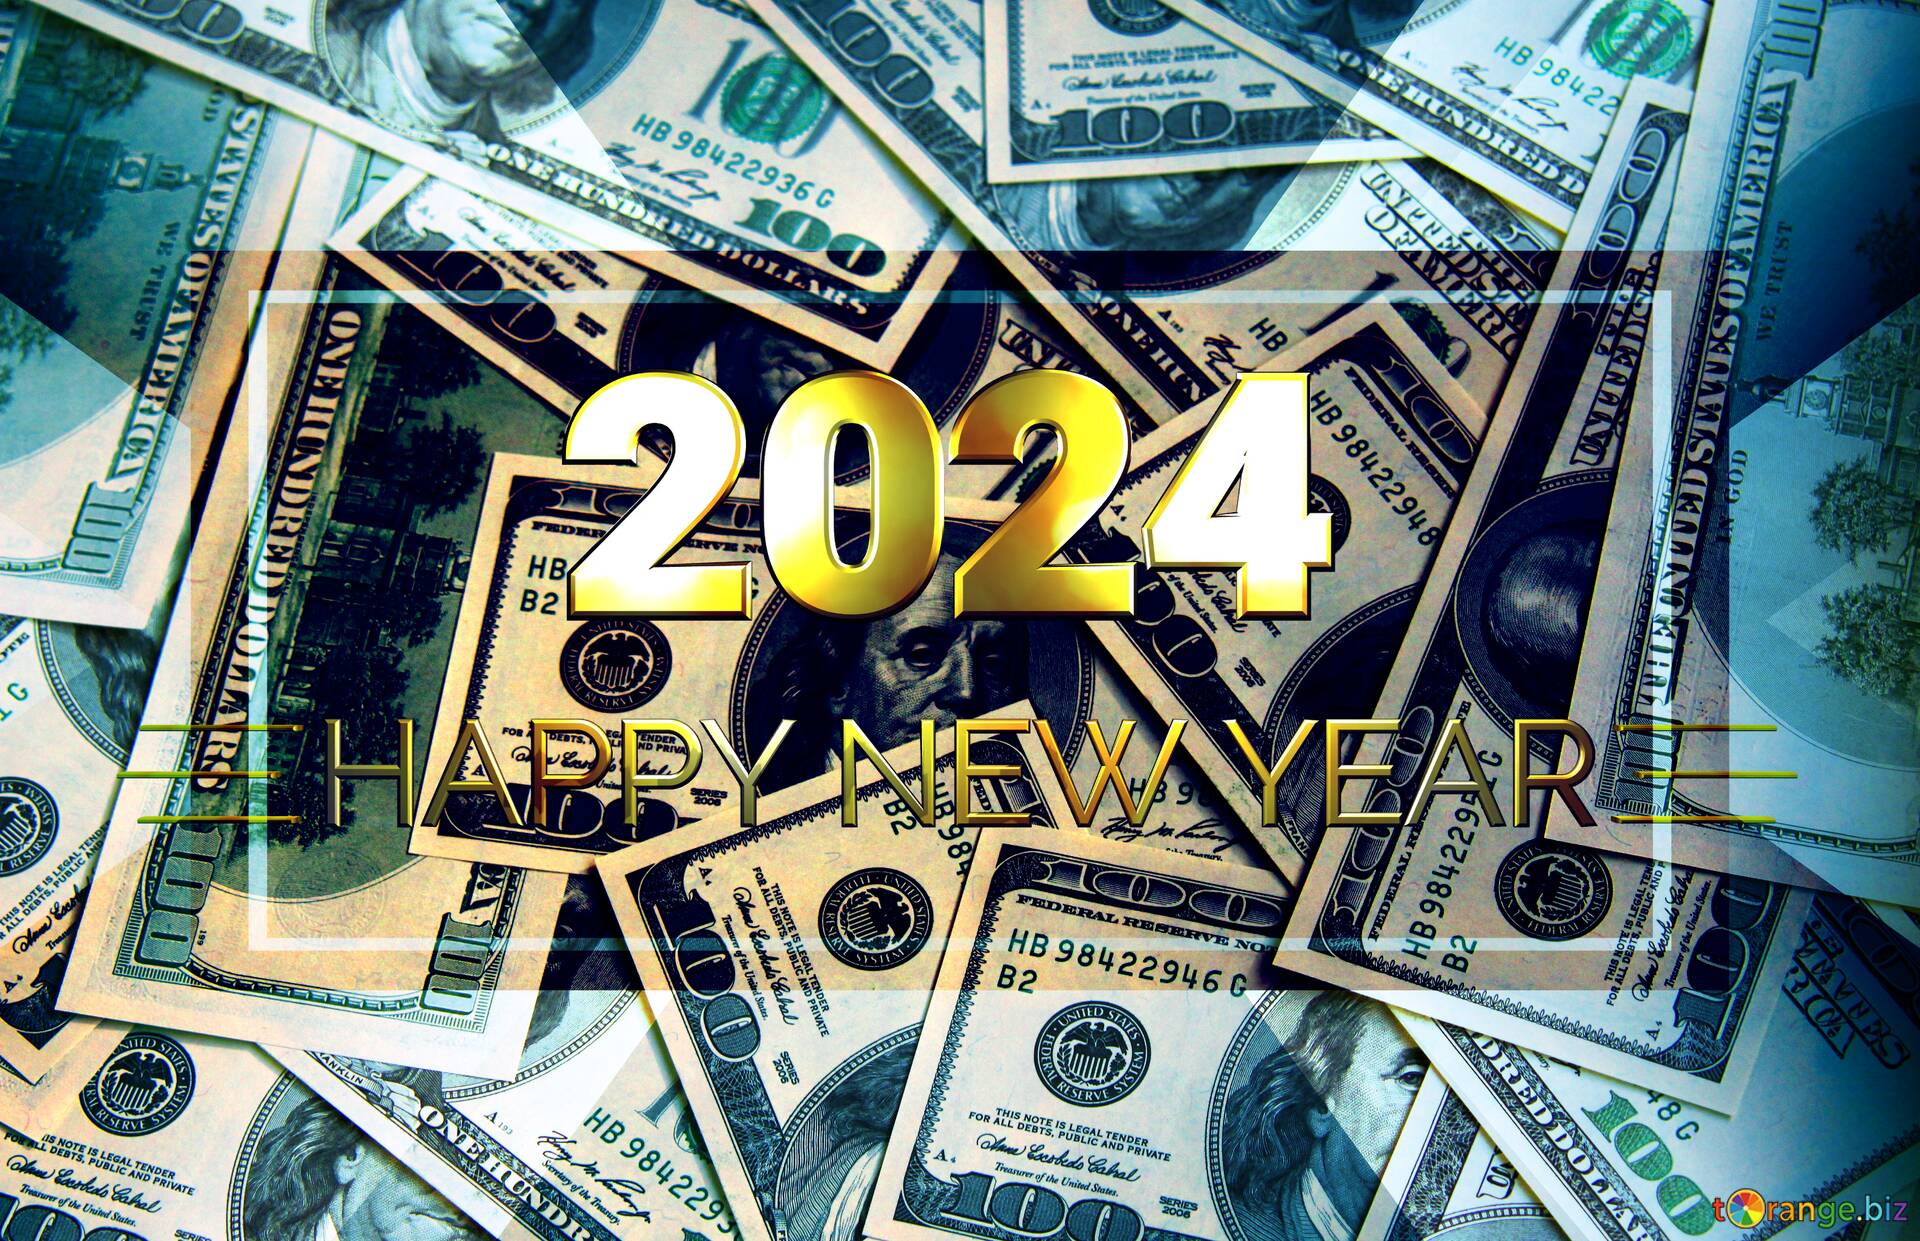 Download free picture Dollars rich Shiny happy new year 2022 background on CC-BY License ~ Free Image Stock tOrange.biz ~ fx №212613